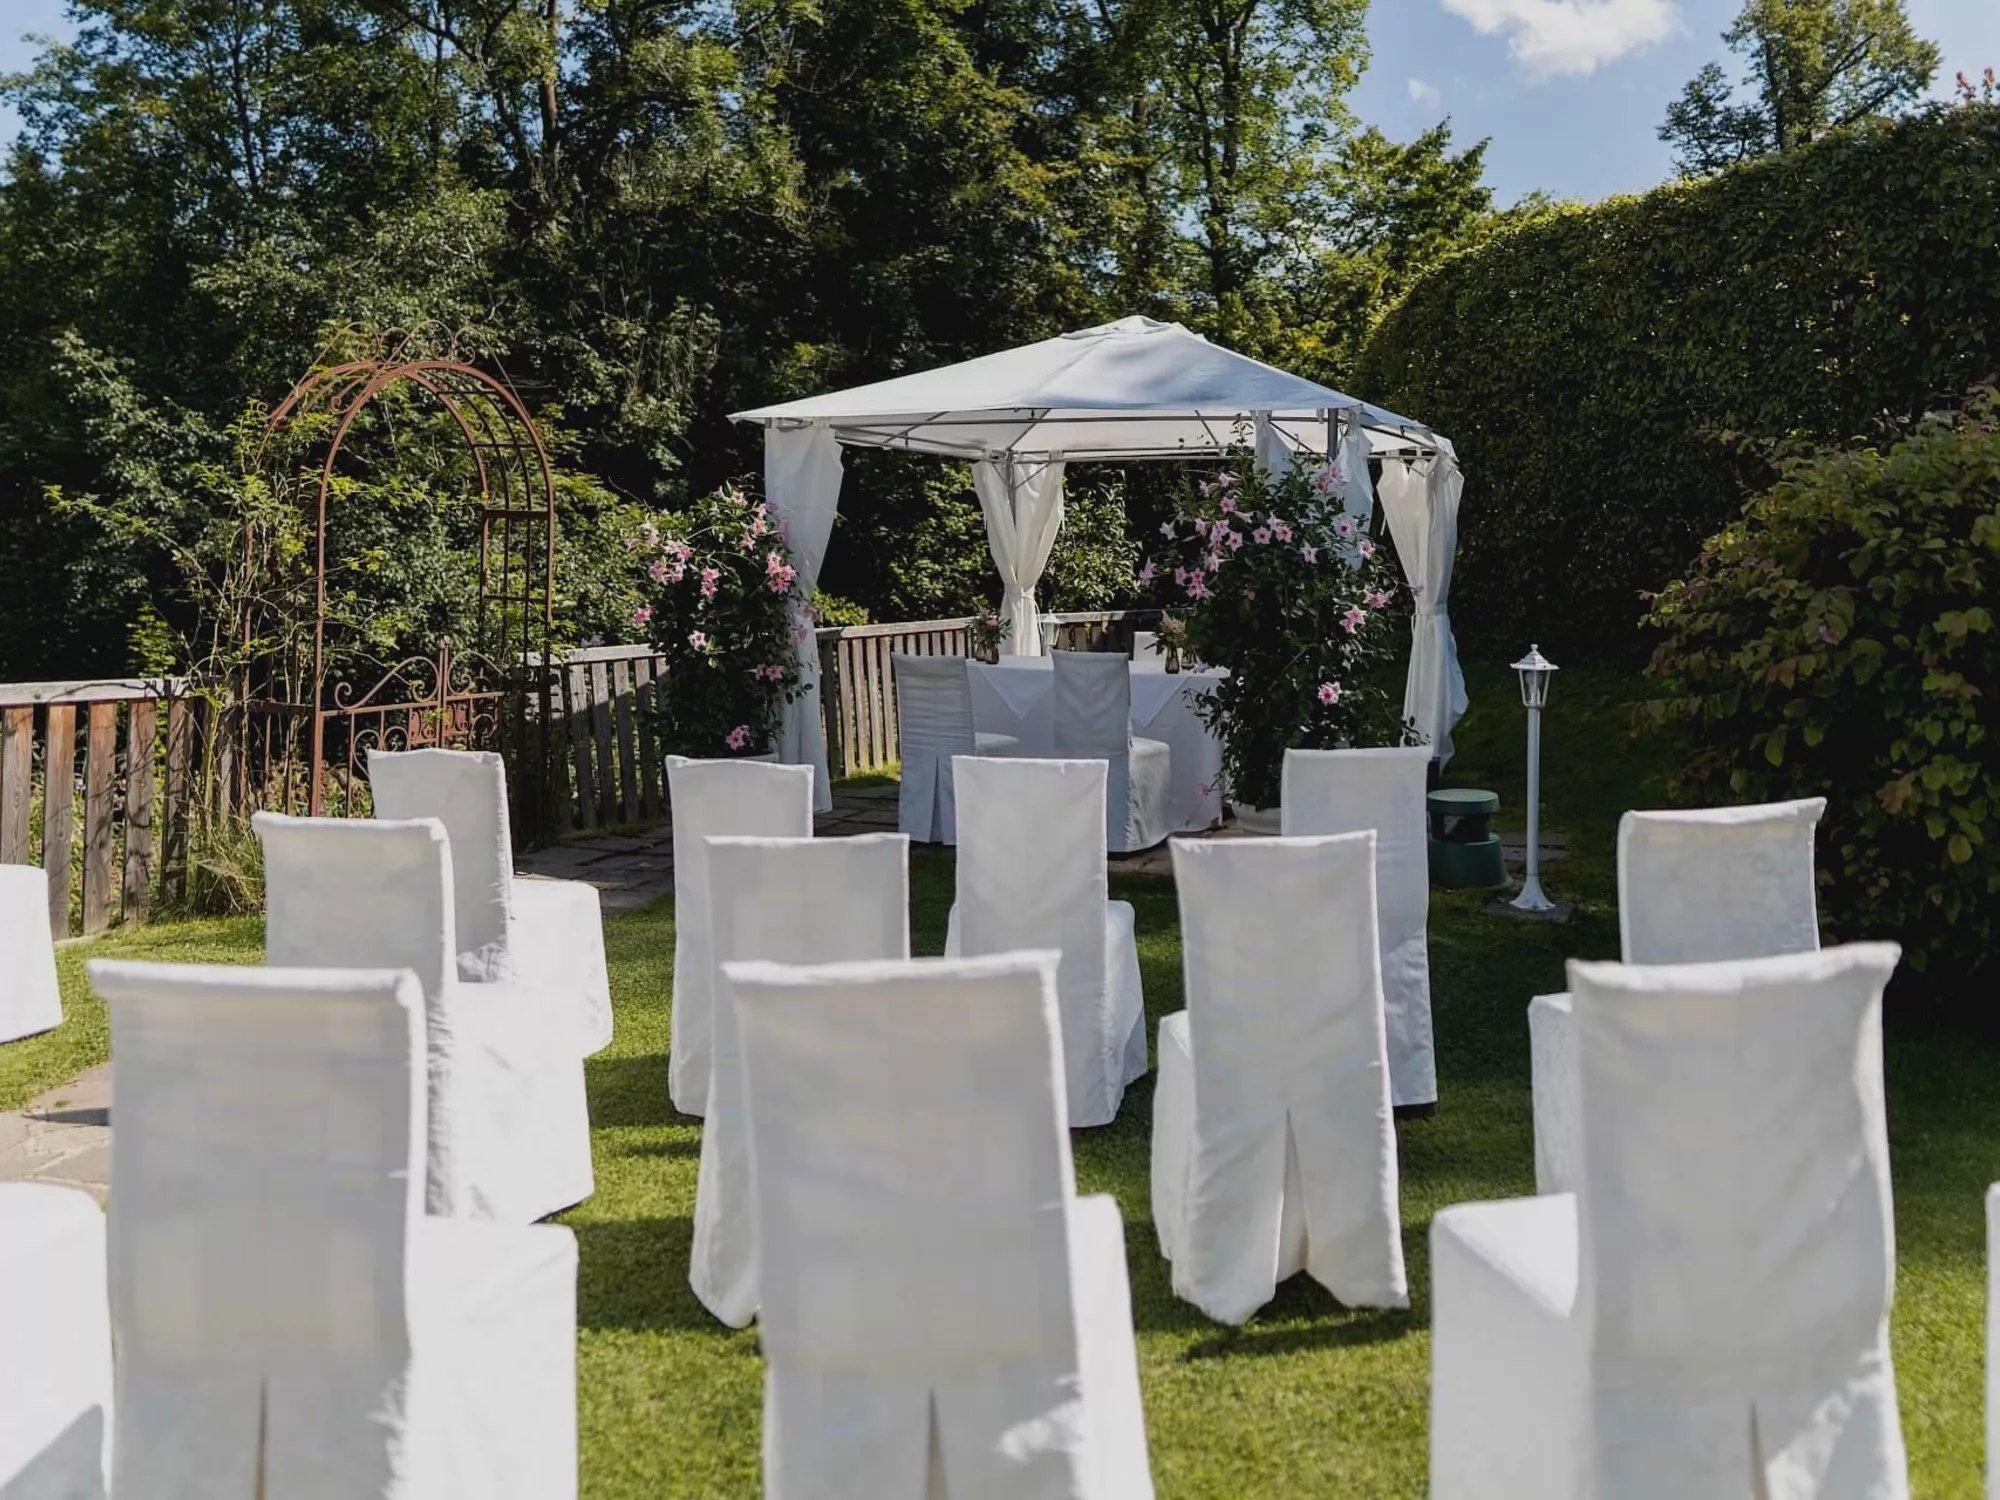 Festively decked-out chairs with white covers prepared for the upcoming ceremony in the garden of Schlosswirt zu Anif near Salzburg